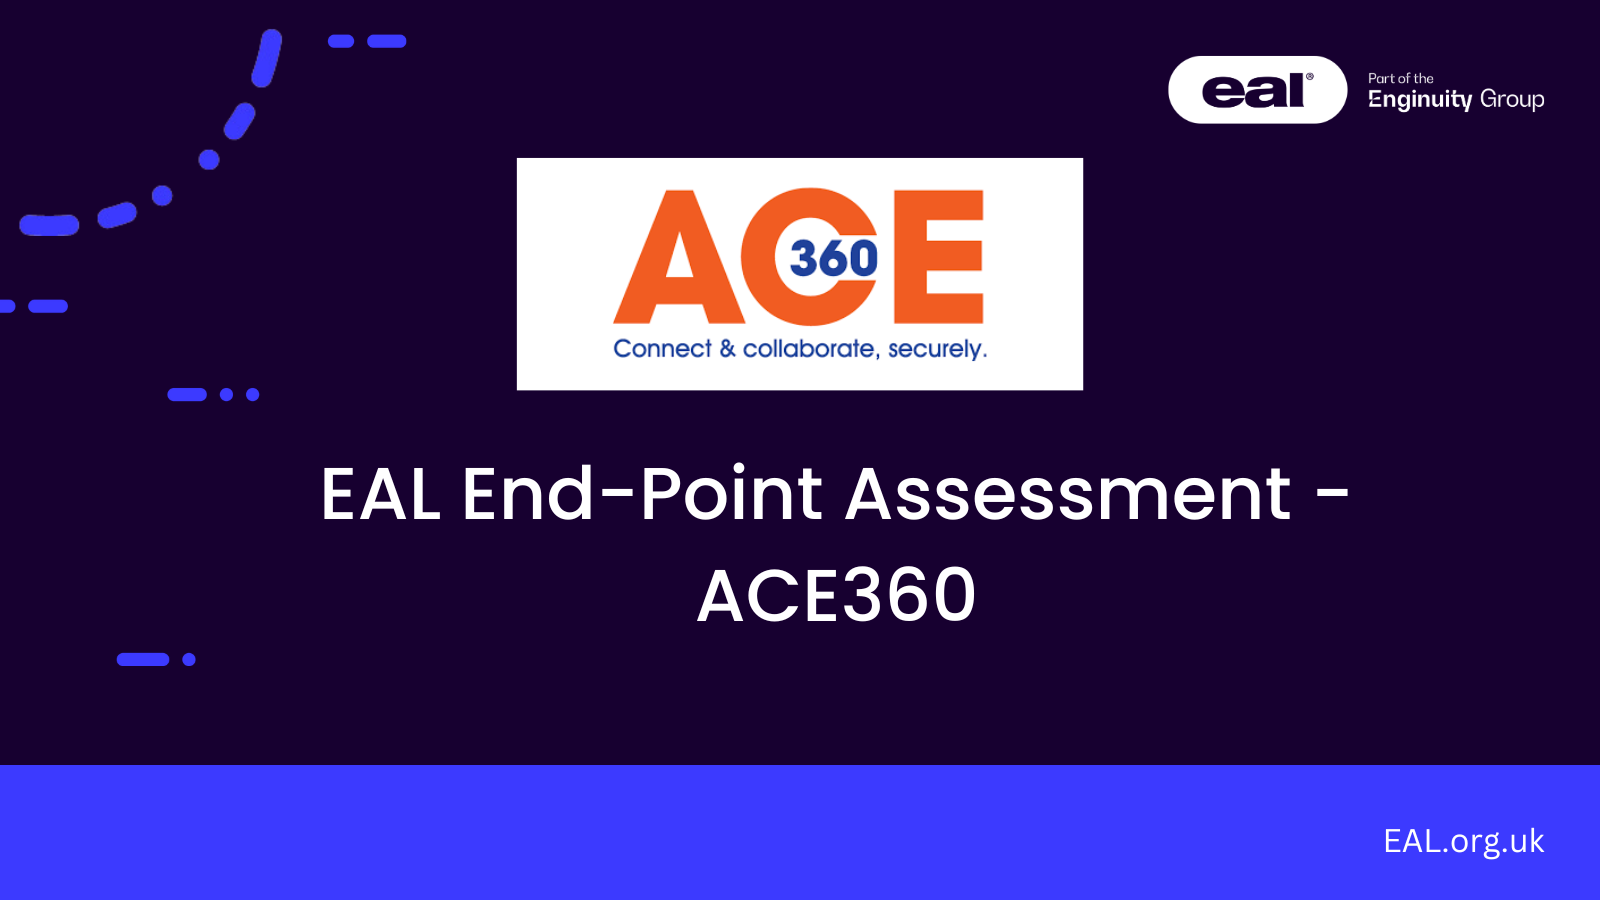 PowerPoint slide with the Ace 360 logo